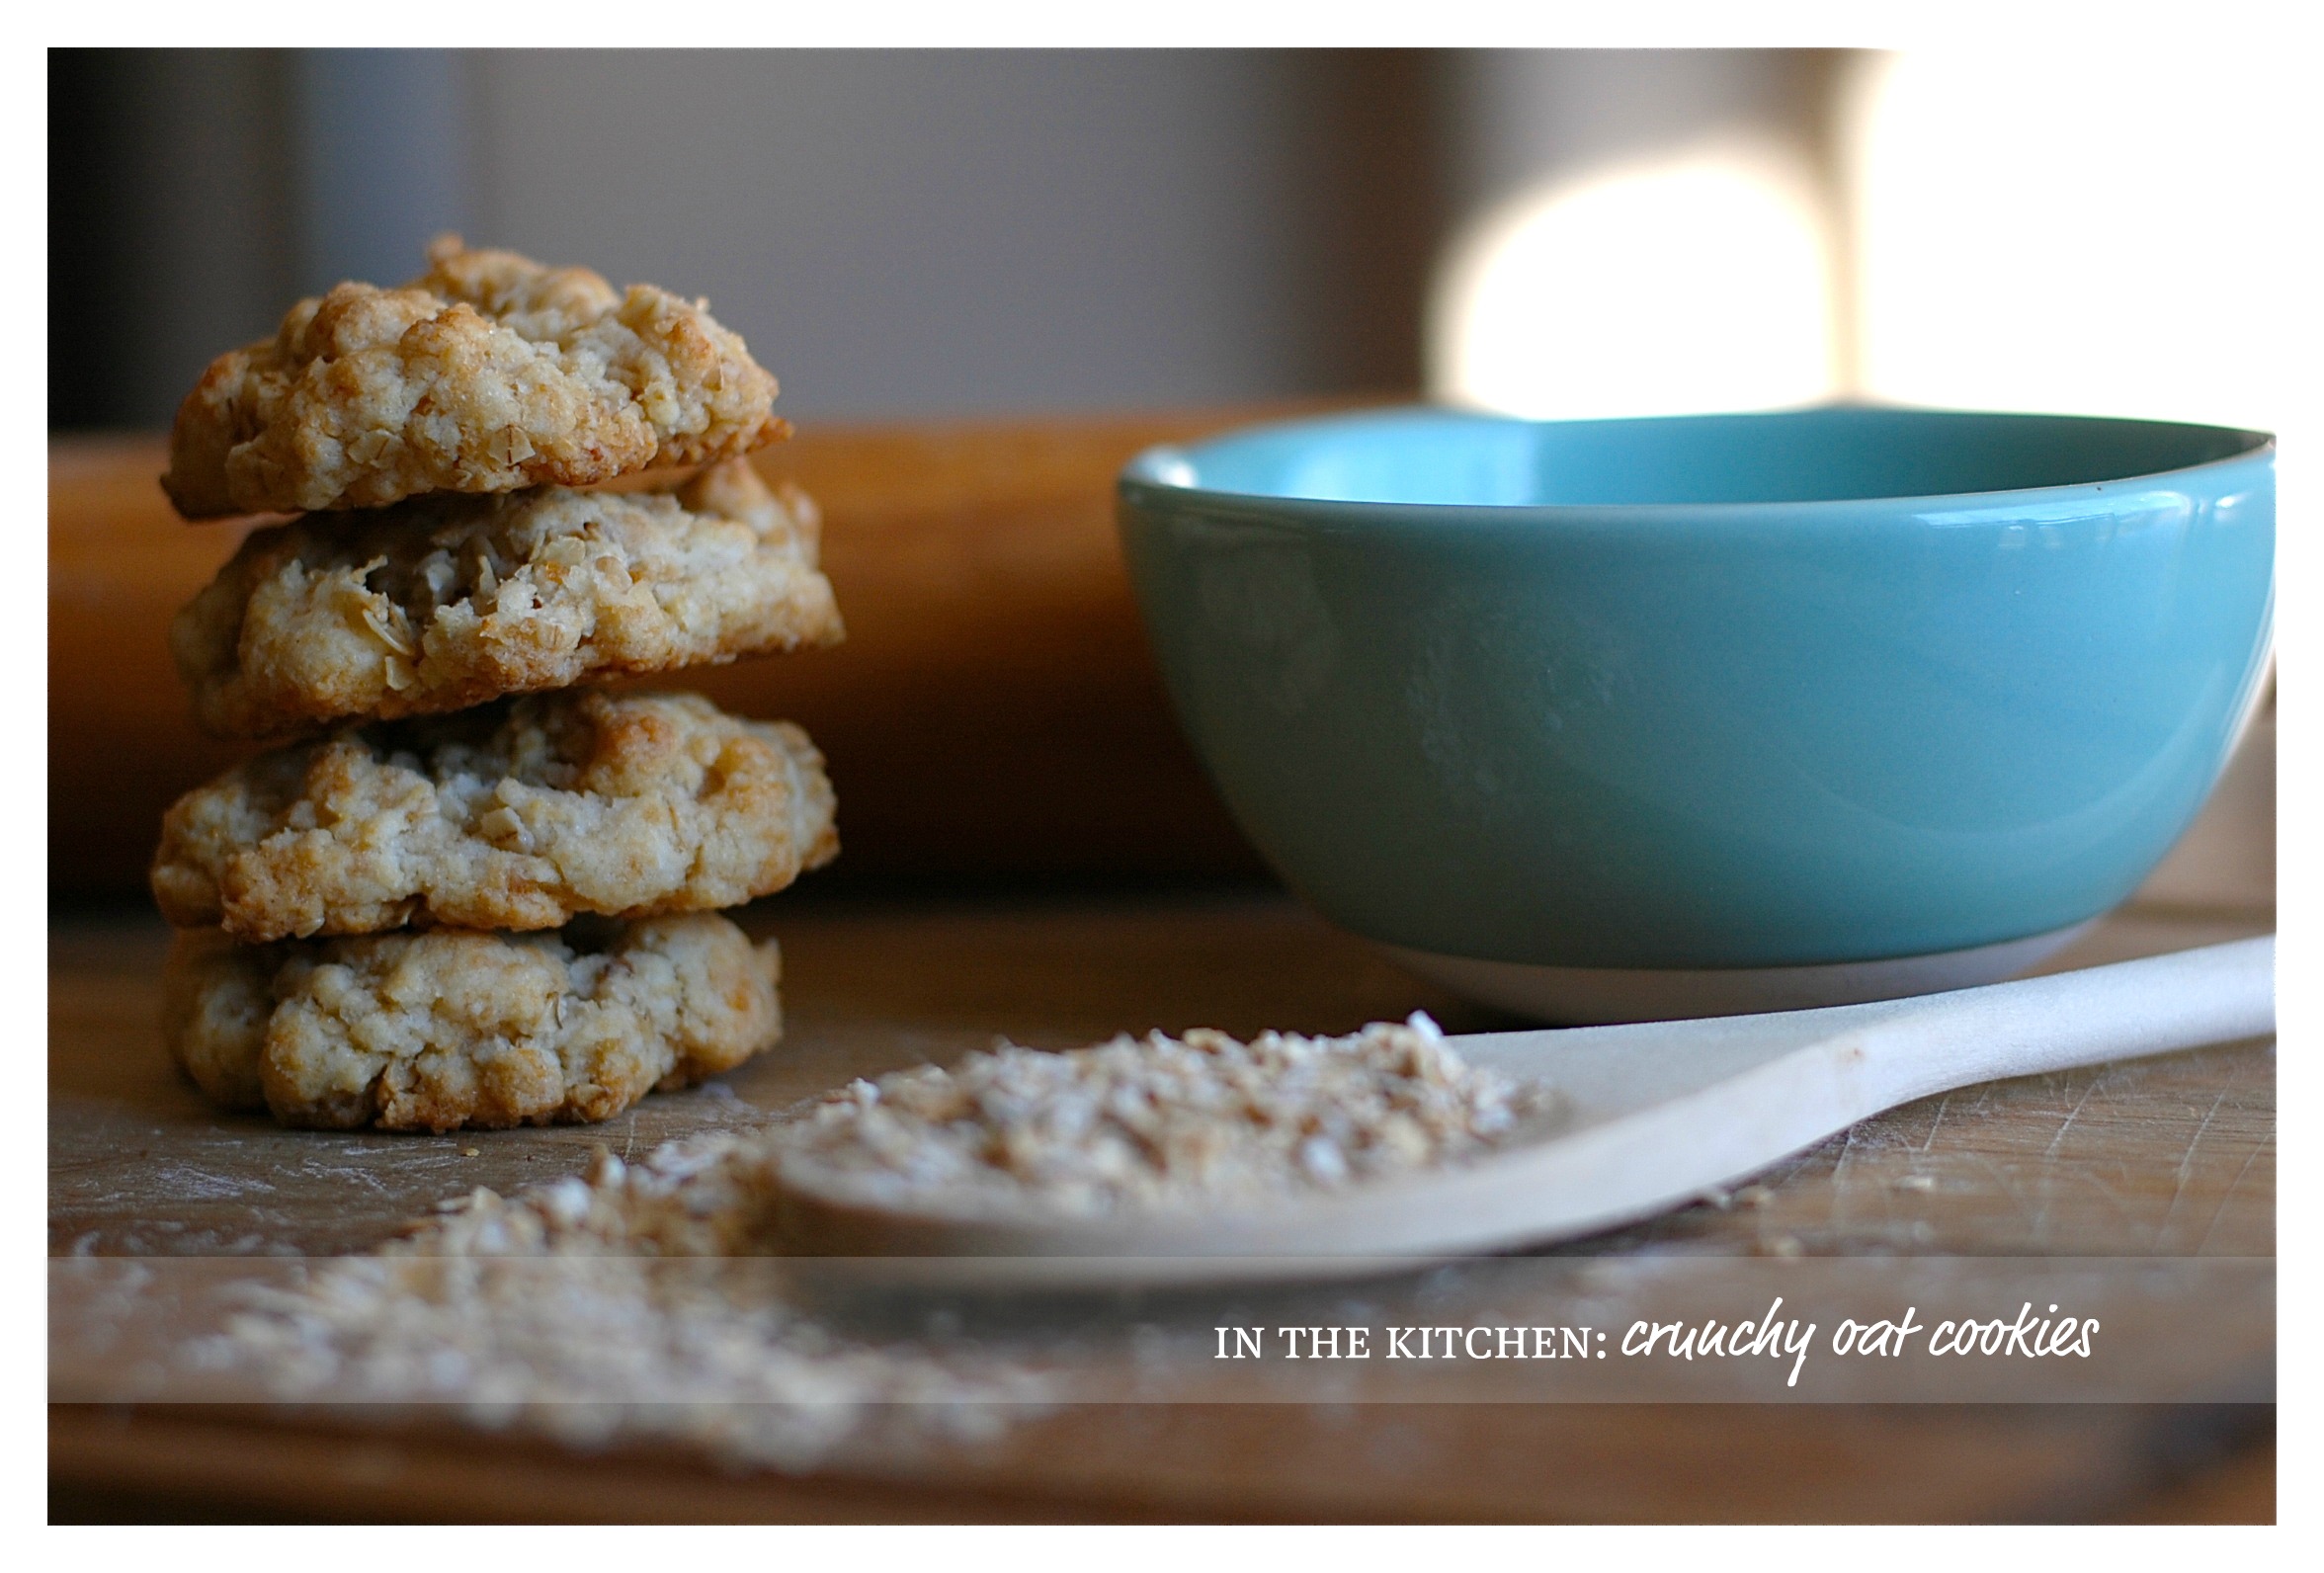 in the kitchen: crunchy oat cookies